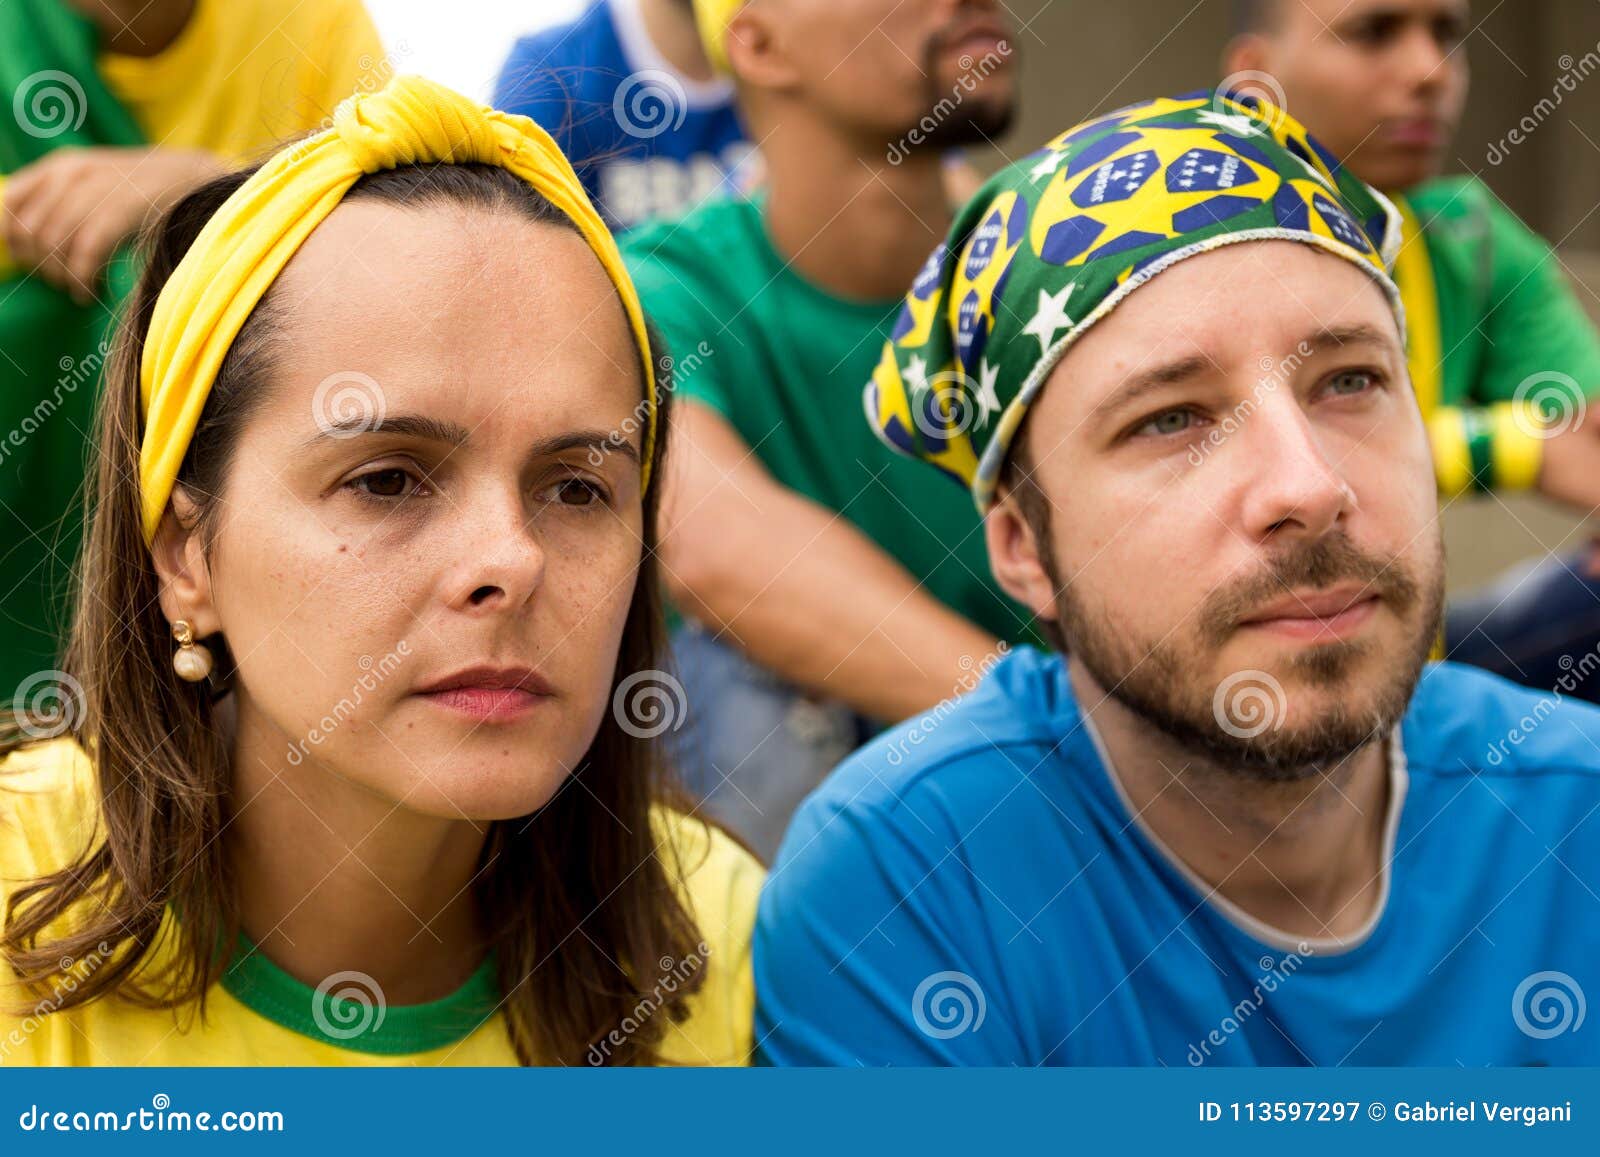 group of fans watching a match and cheering brazilian team.